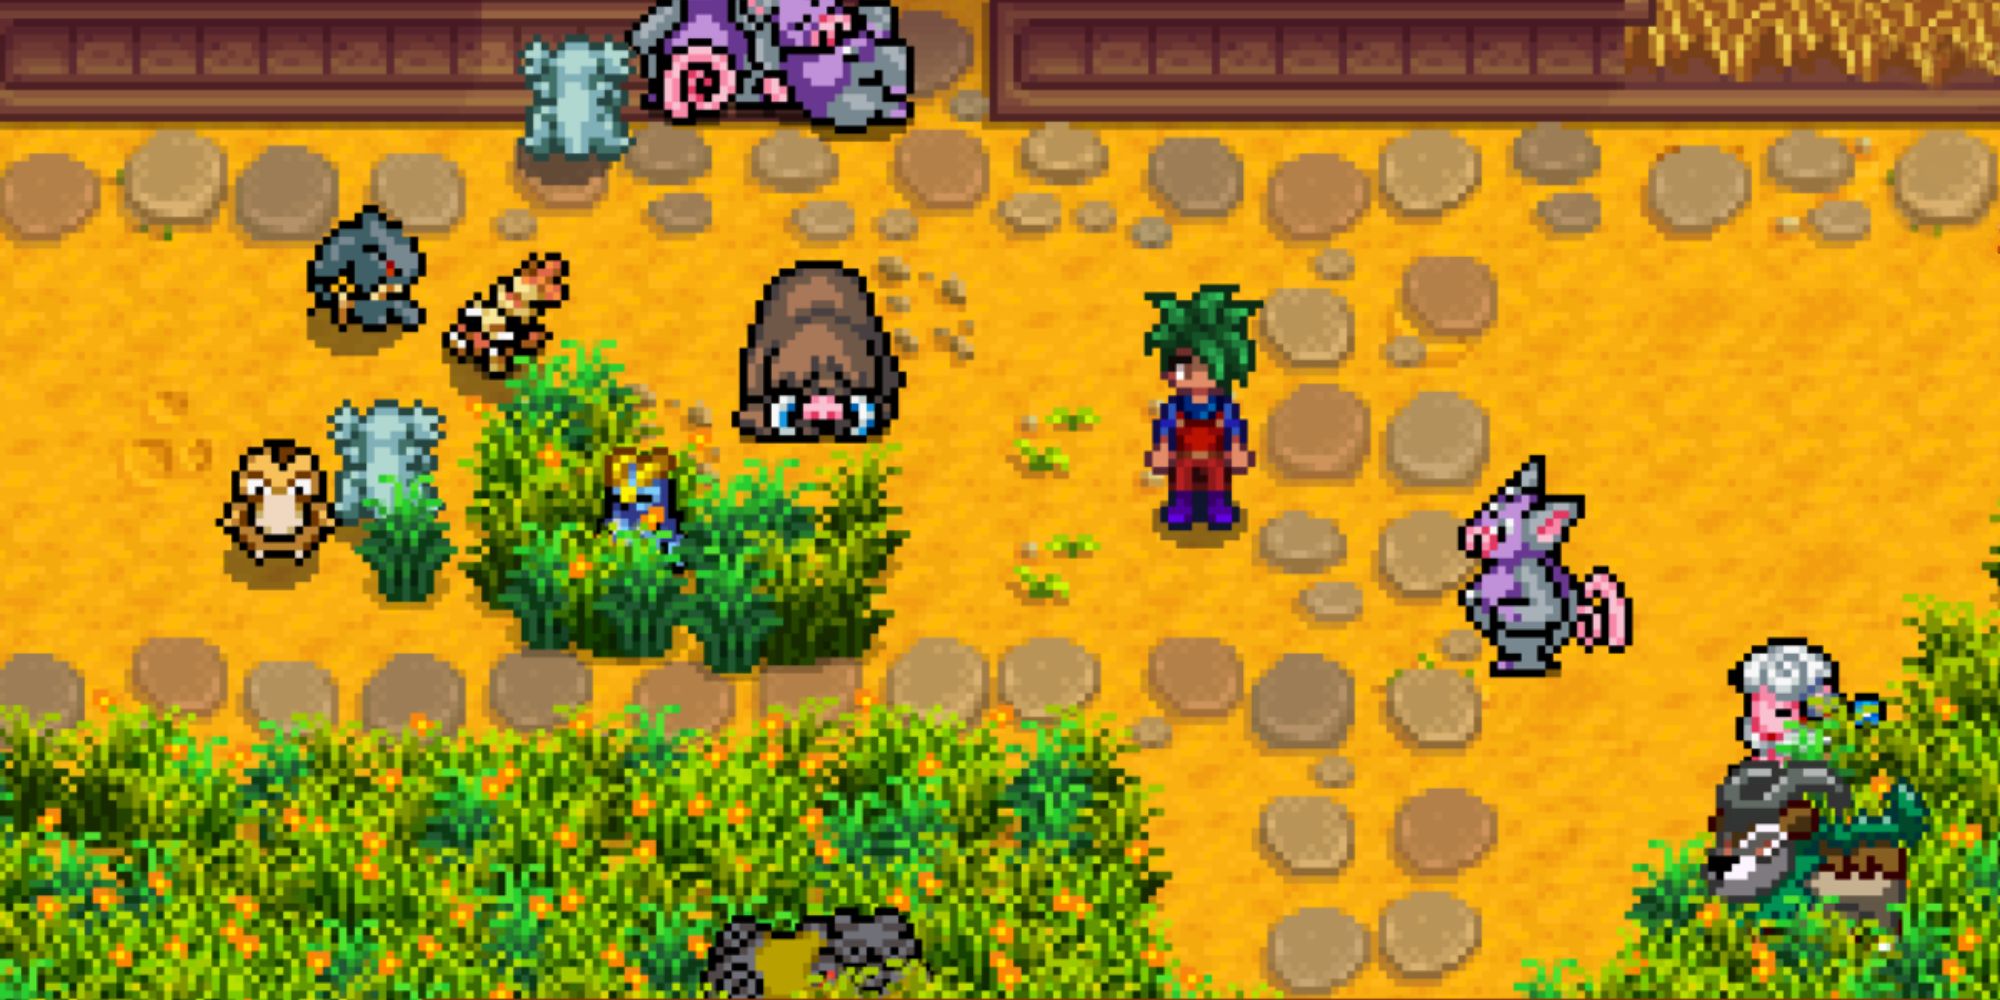 A Stardew Valley character surrounded by several different Pokémon